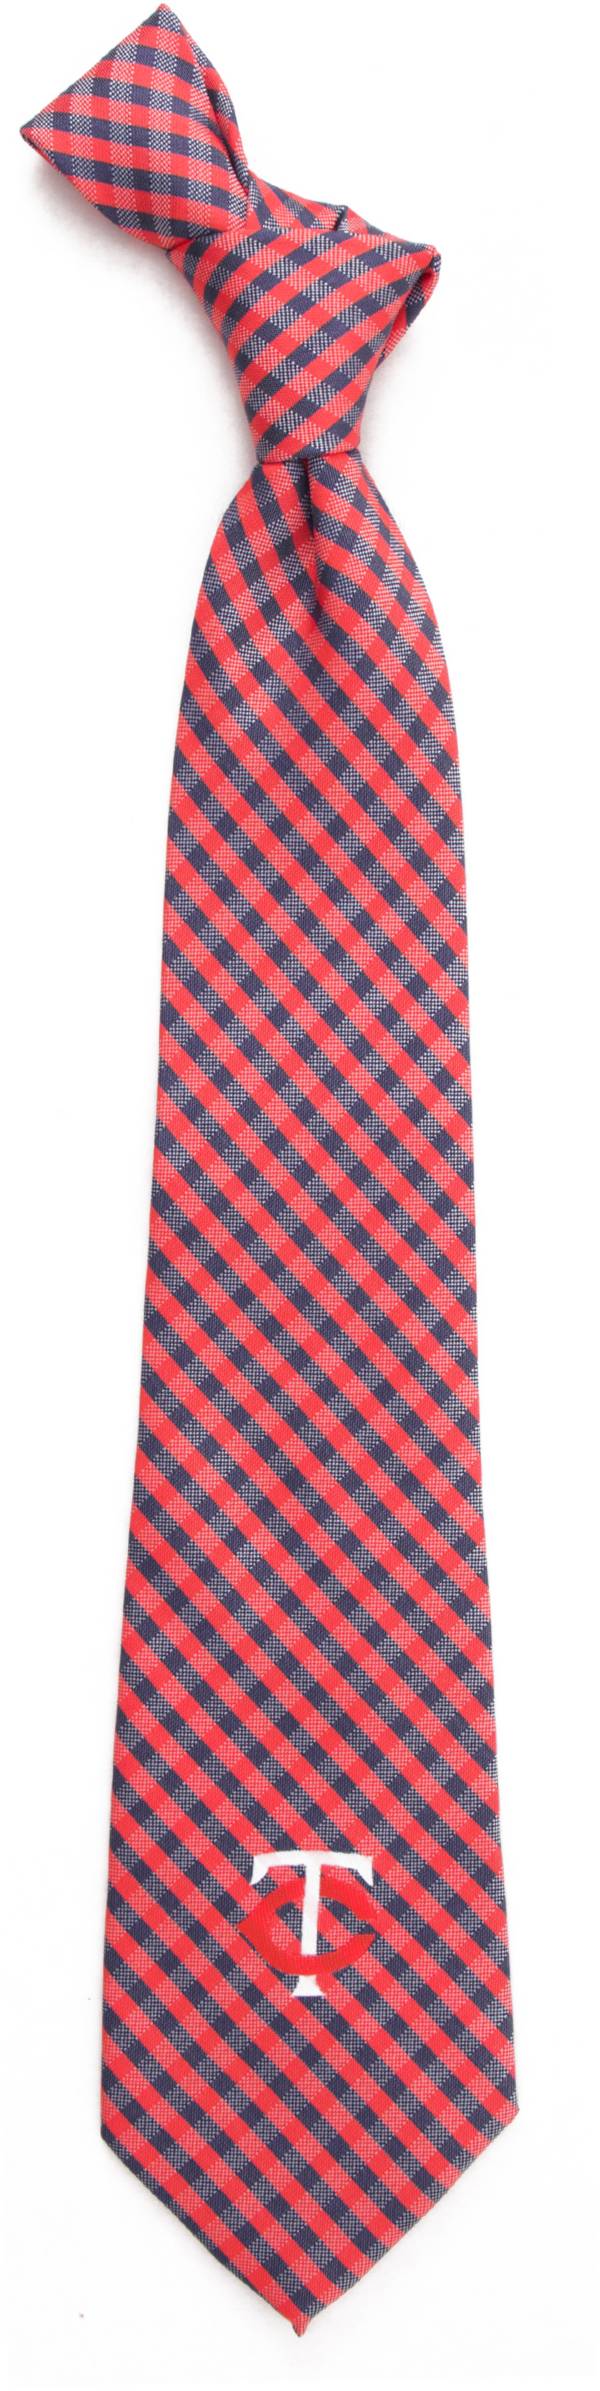 Eagles Wings Minnesota Twins Gingham Necktie product image